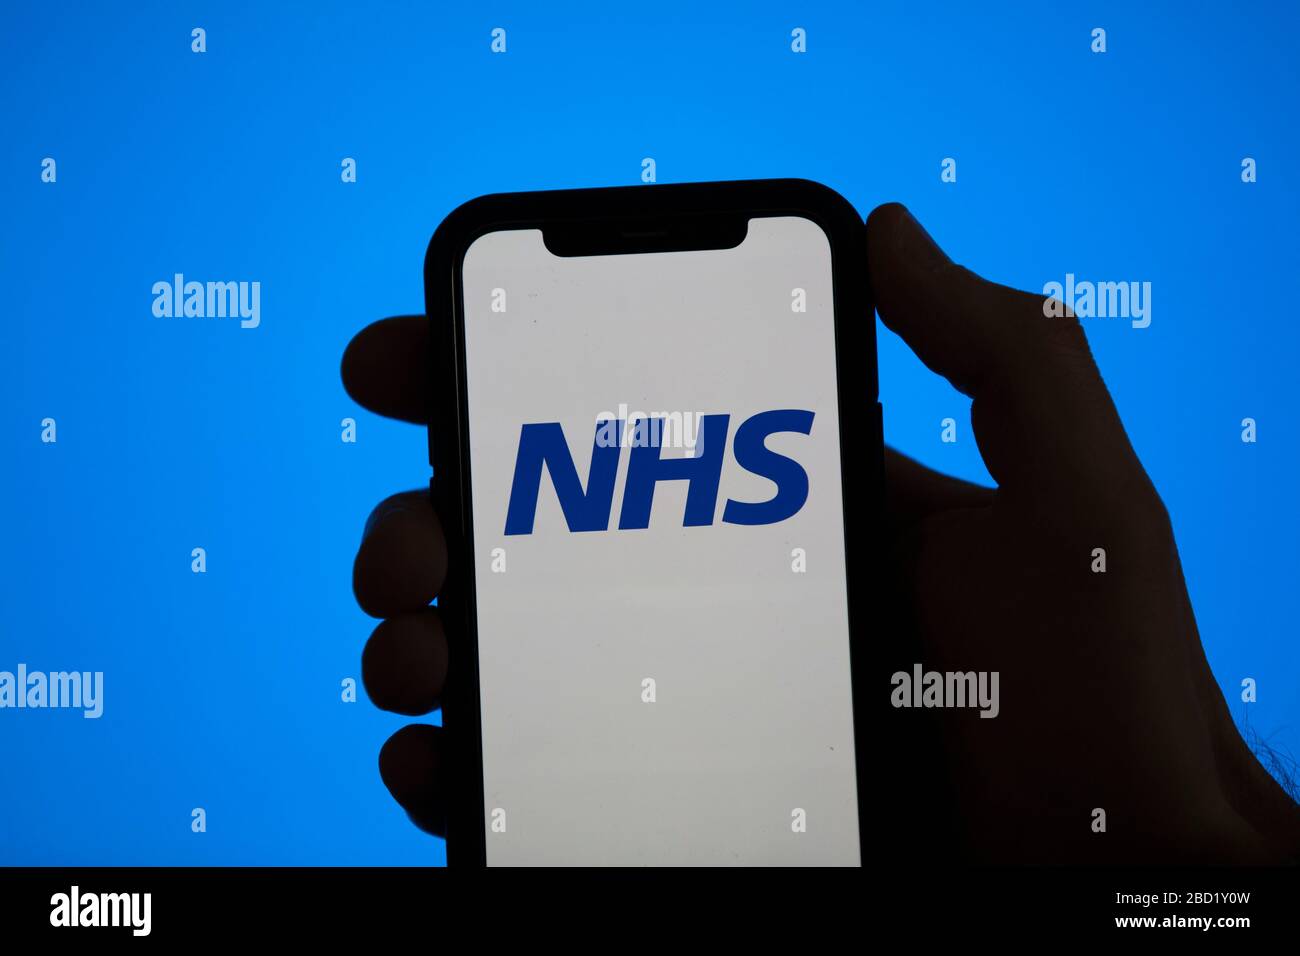 LONDON, UK - April 6th 2020: NHS National health service logo on a smartphone Stock Photo